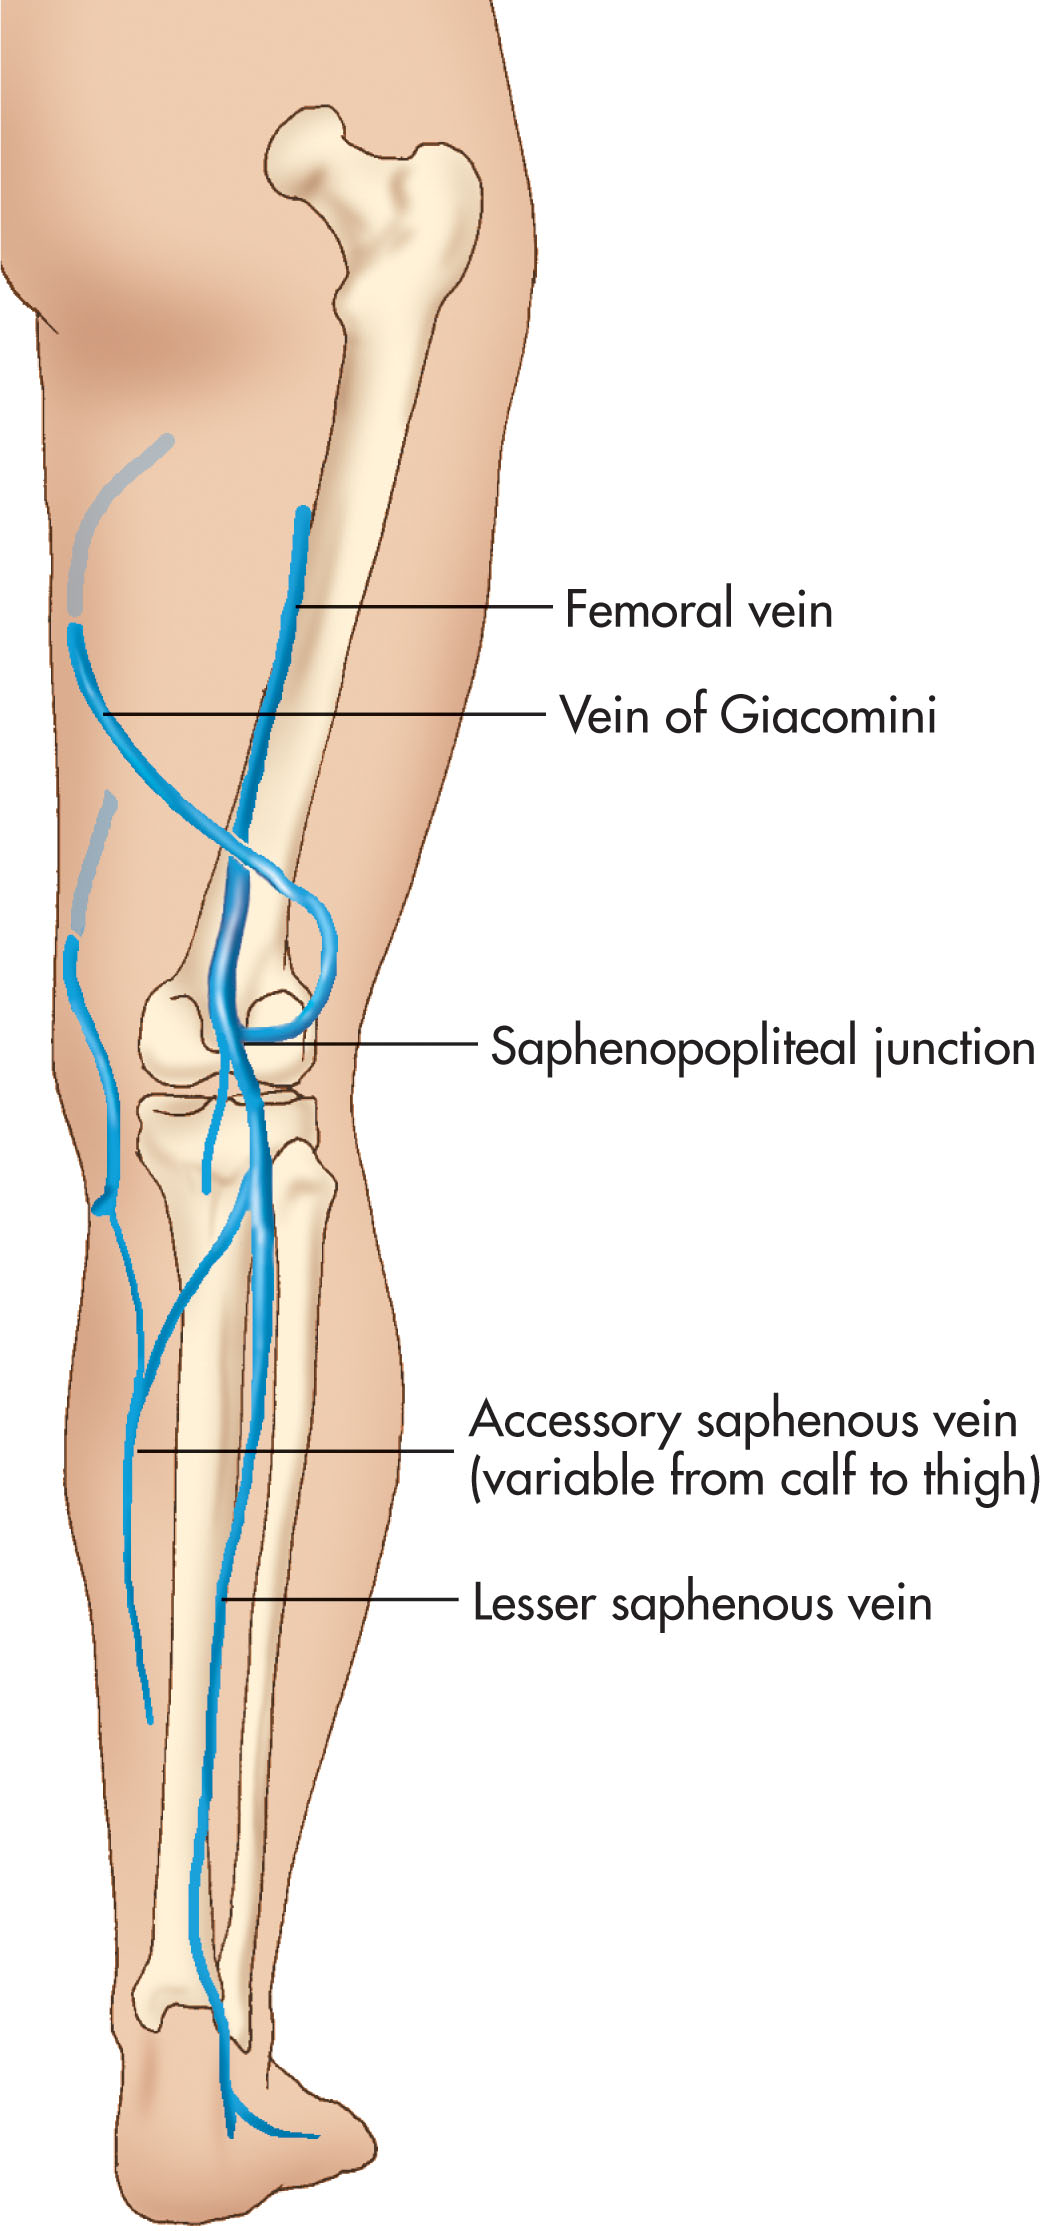 Fig. 40.3, The small saphenous vein, also referred to as the lesser saphenous vein, is a superficial vein that travels along the midline portion of the posterior calf. The small saphenous vein typically drains into the popliteal vein in the popliteal fossa.